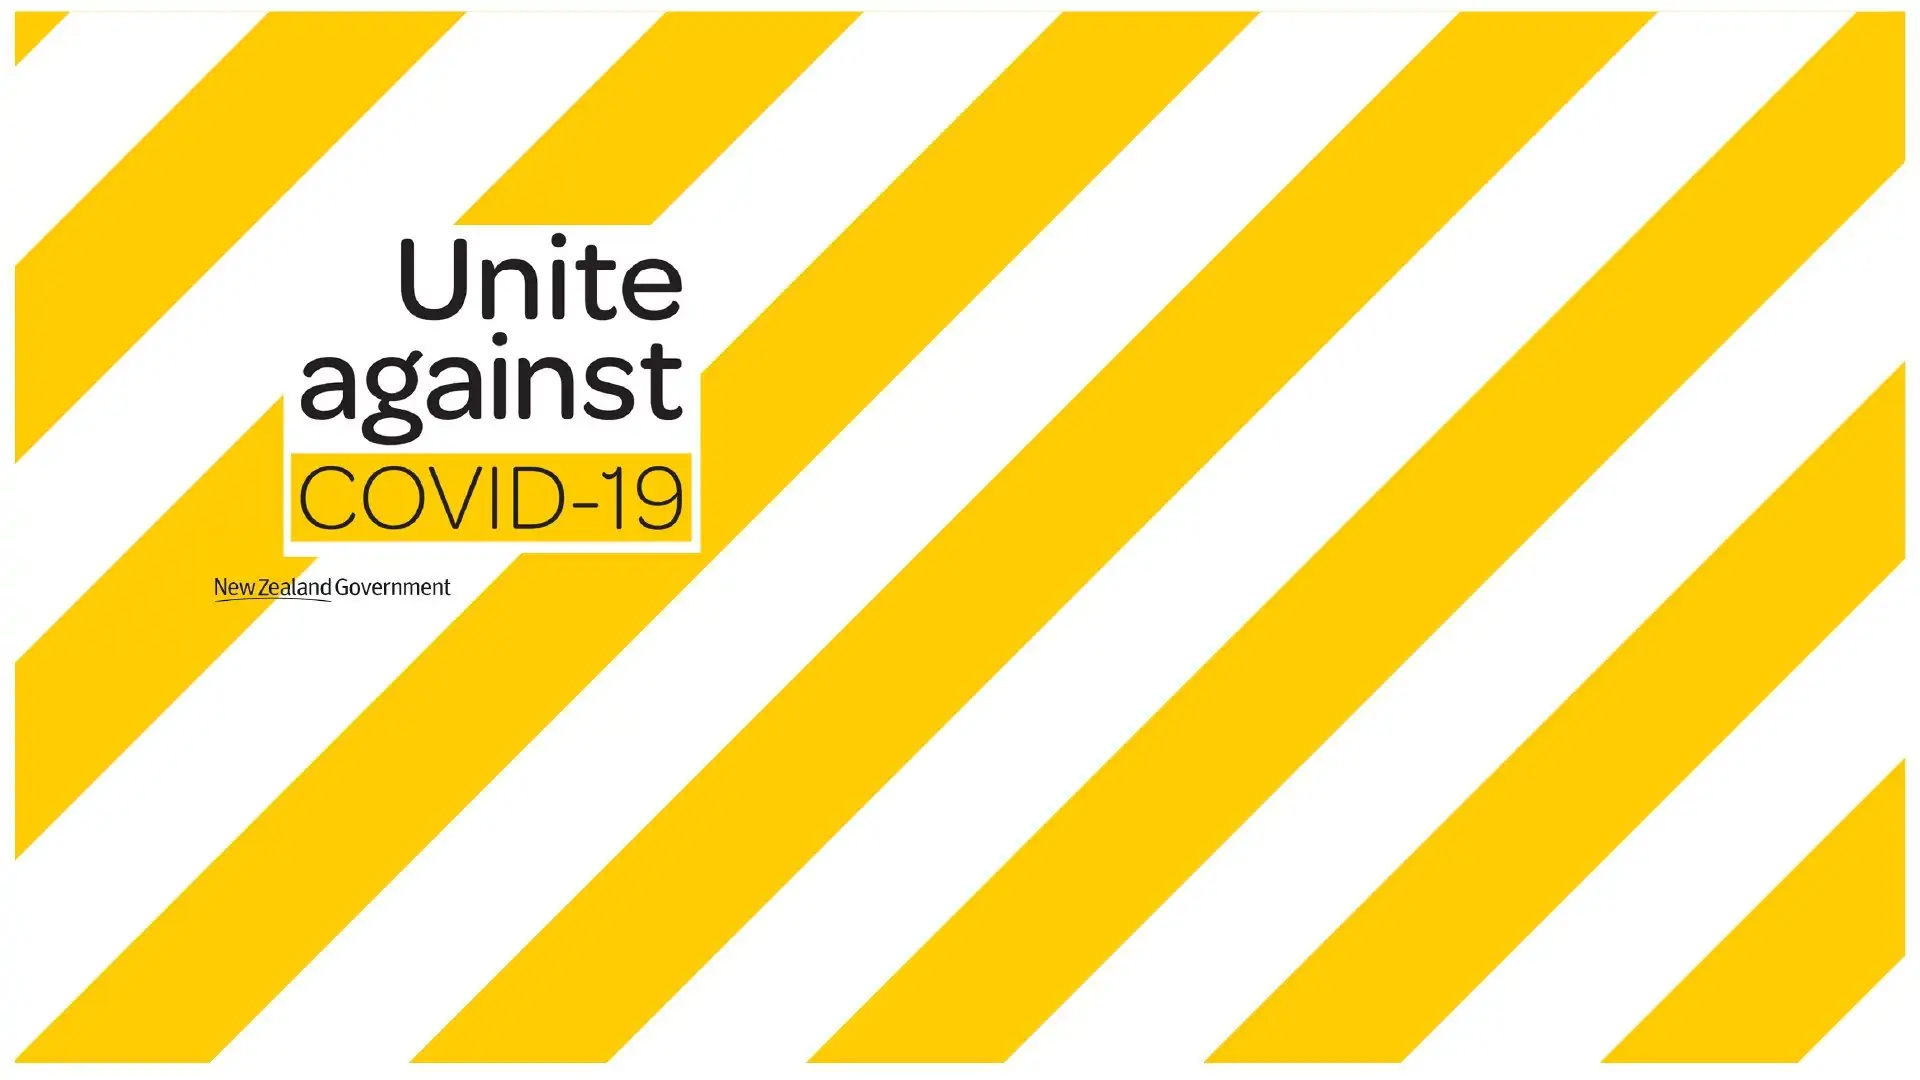 A COVID-19 update from the New Zealand Government on 12th August 2021, featuring a yellow and white background and the words "Unite against COVID-19.